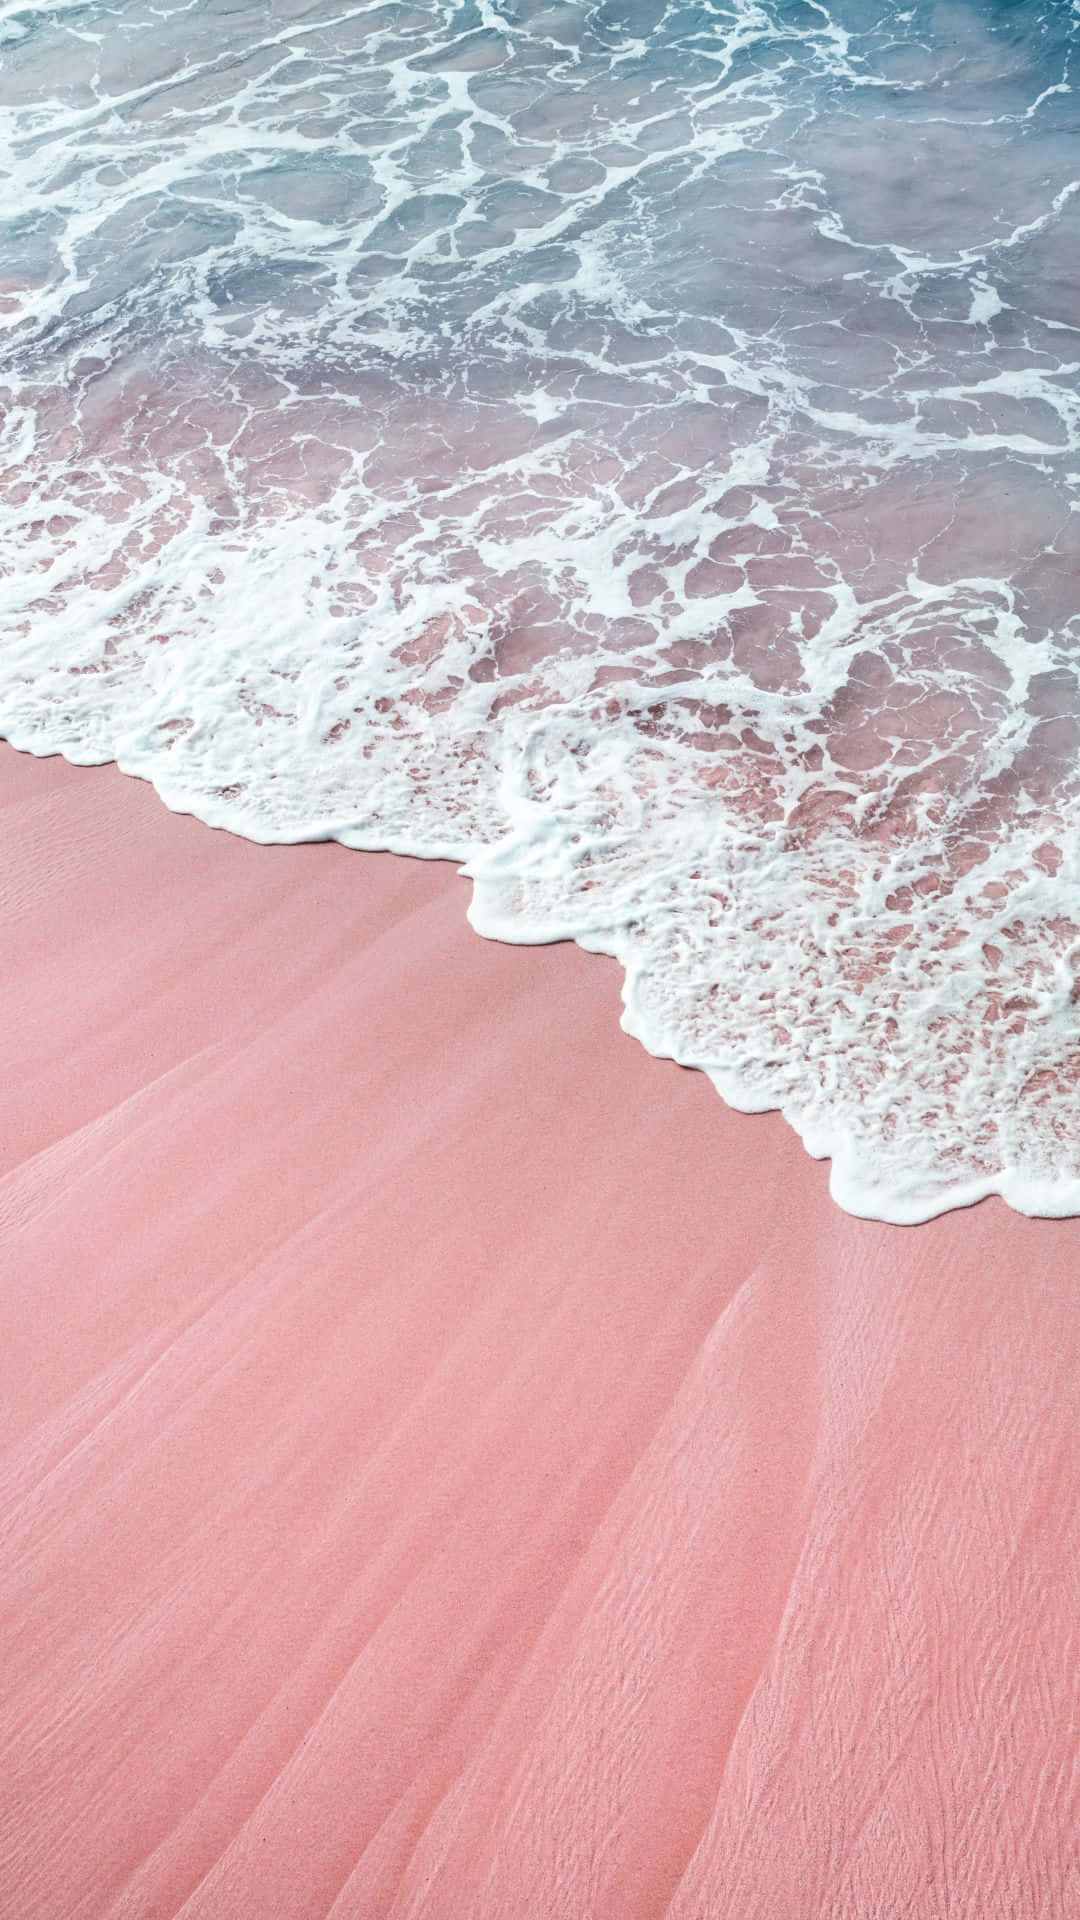 Take in the beauty of a pastel pink beach with a calming aesthetic. Wallpaper